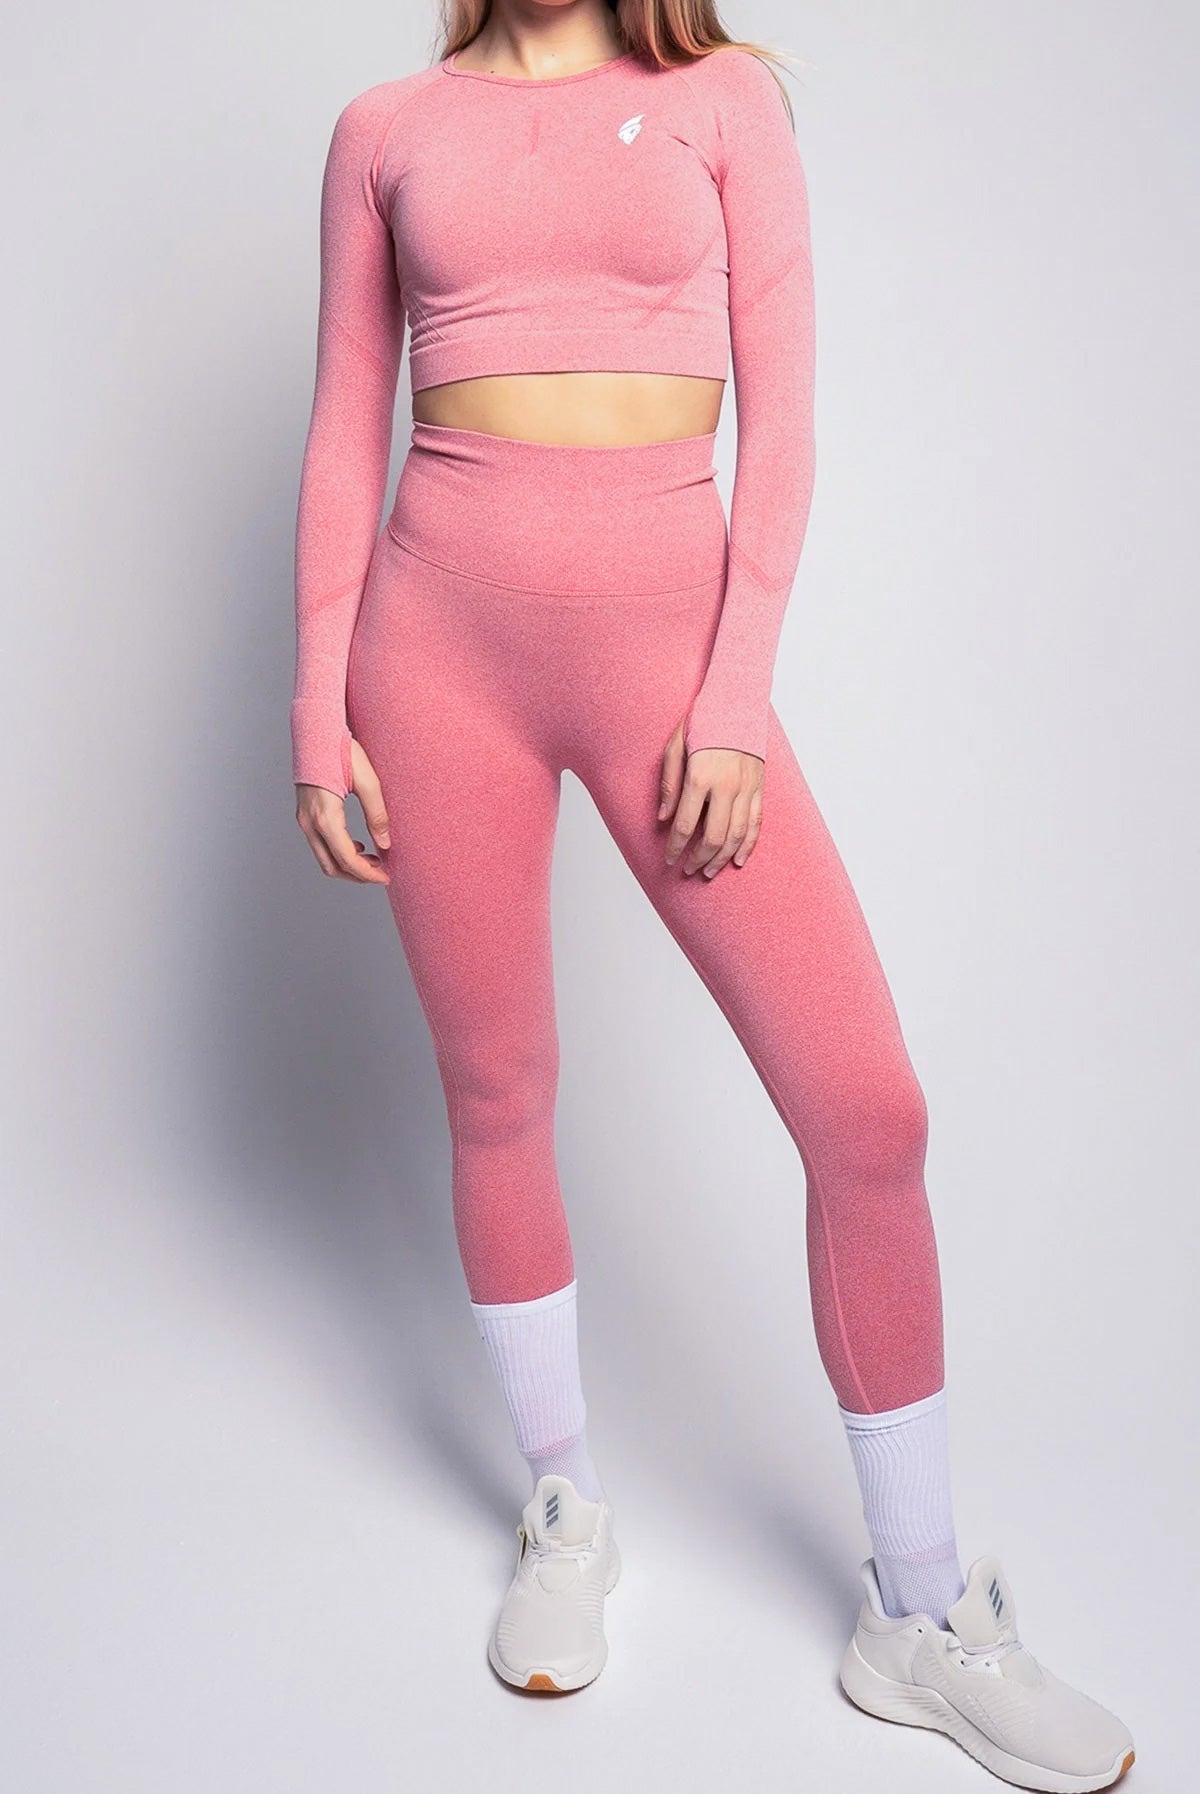 Athletic Tight Pink - FURYCRY® | Tennis - Performance - Streetwear